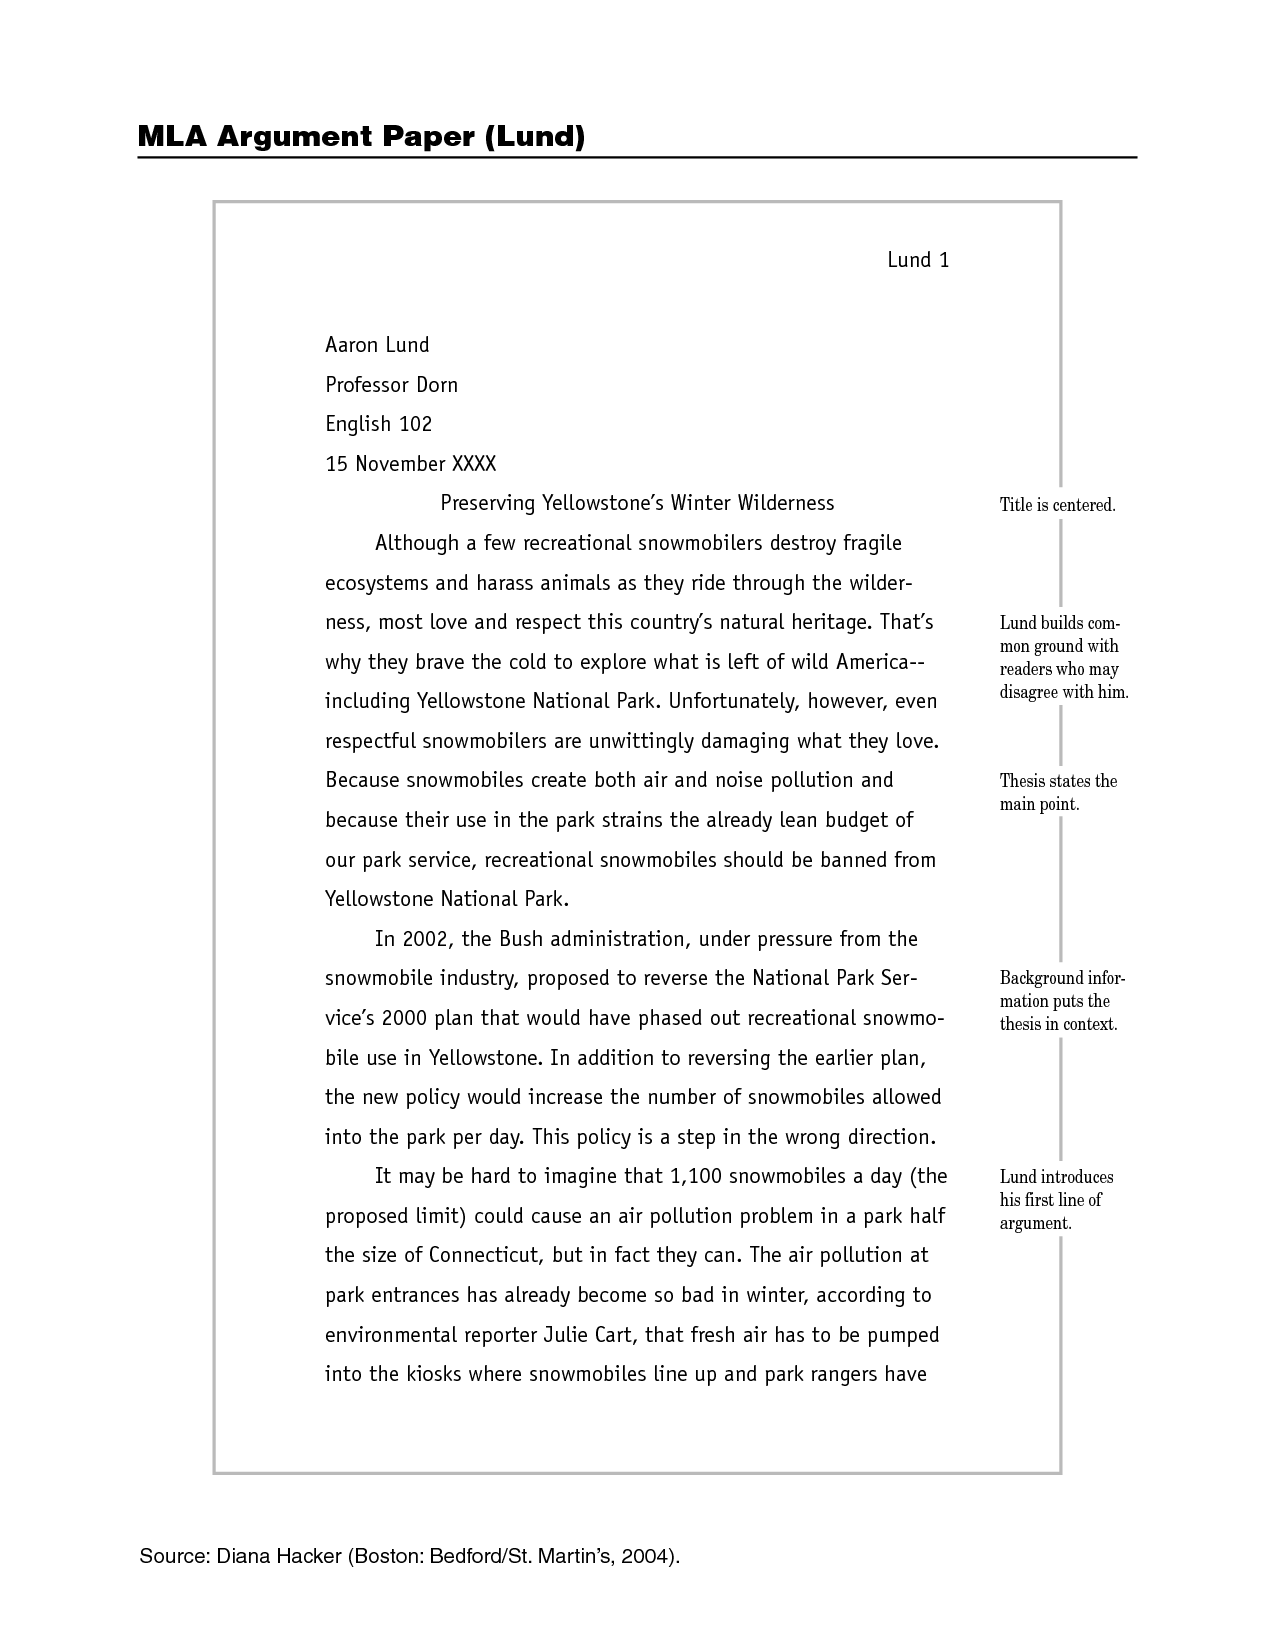 Essay in mla style